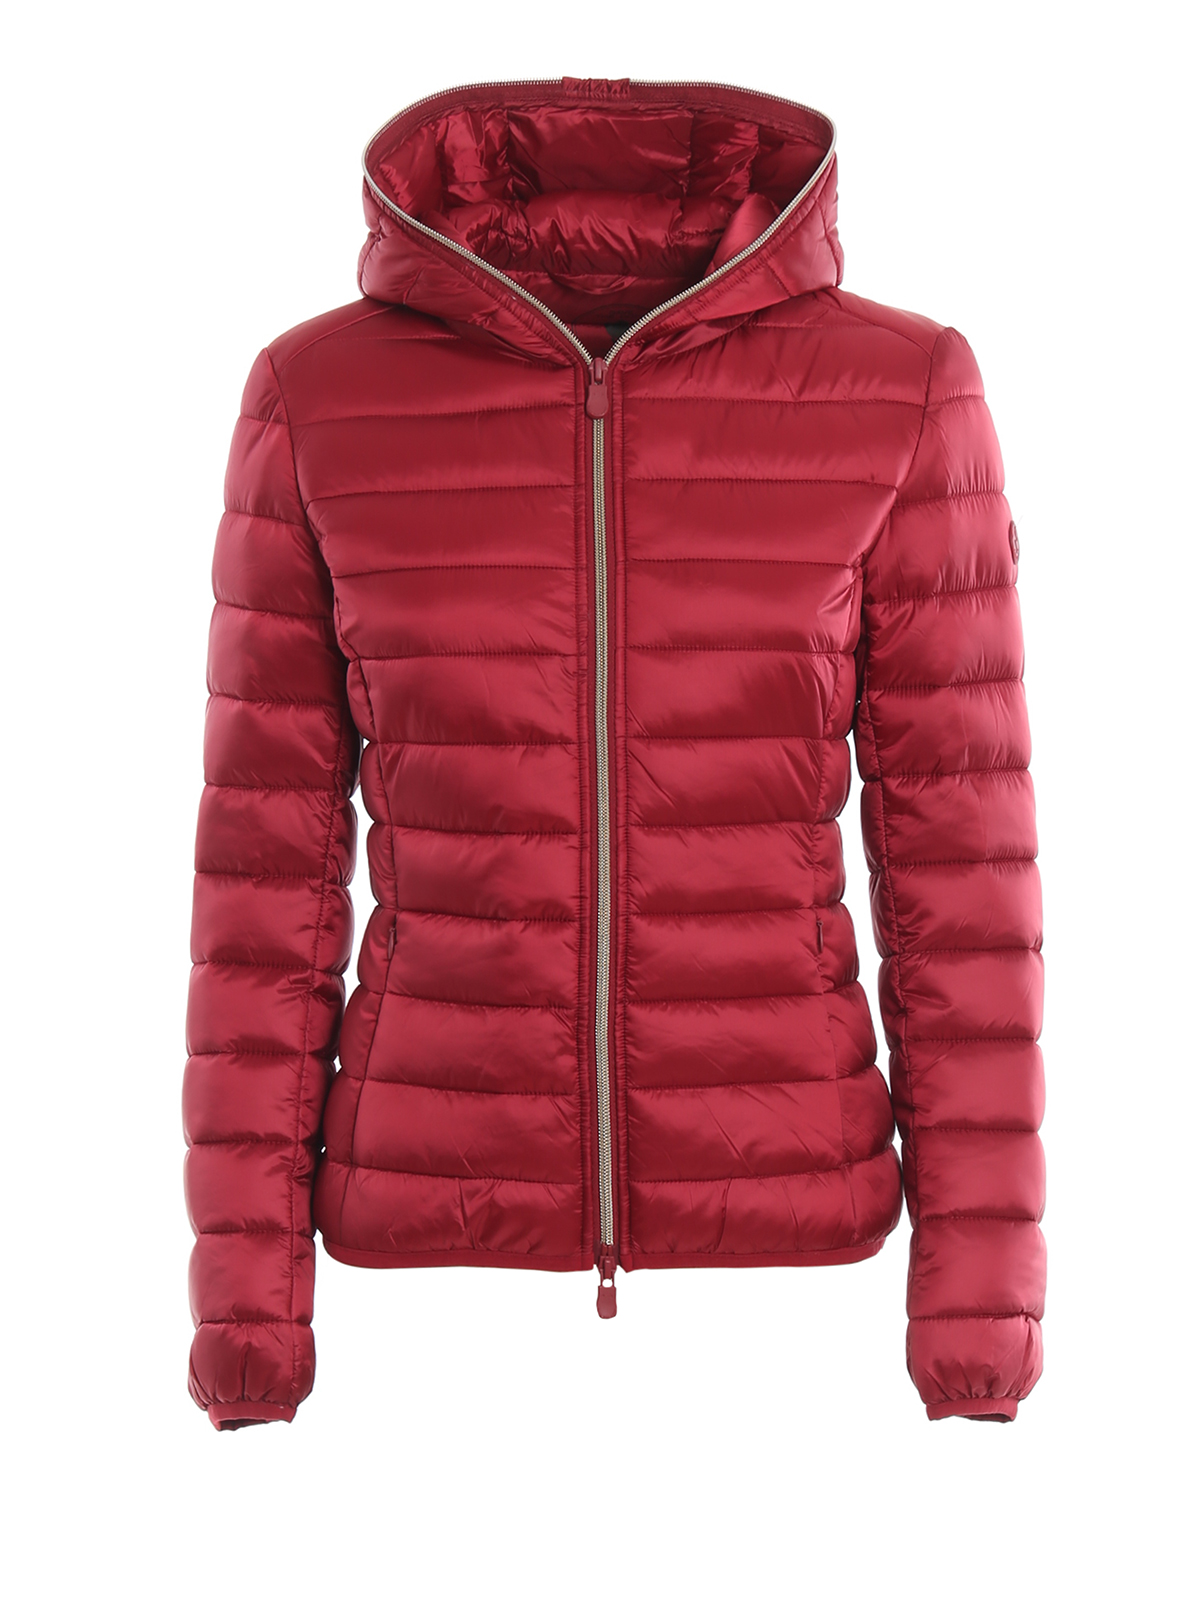 SAVE THE DUCK RED HOODED PUFFER JACKET